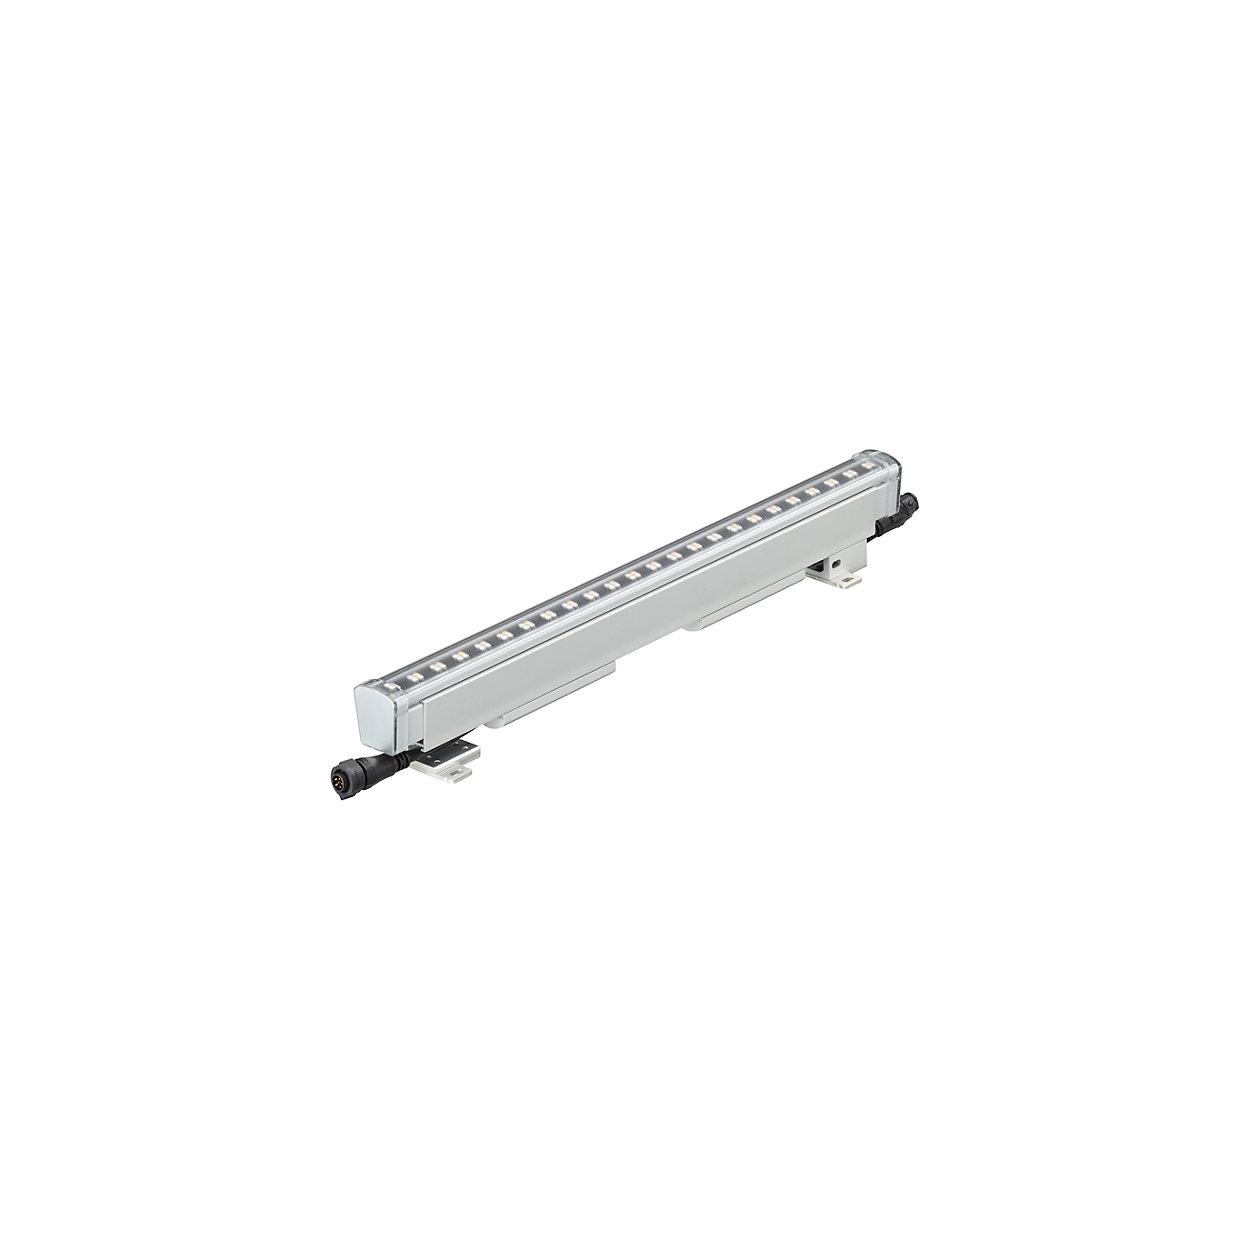 iColor Accent Compact - High resolution media direct view linear LED luminaire with RGBW color light